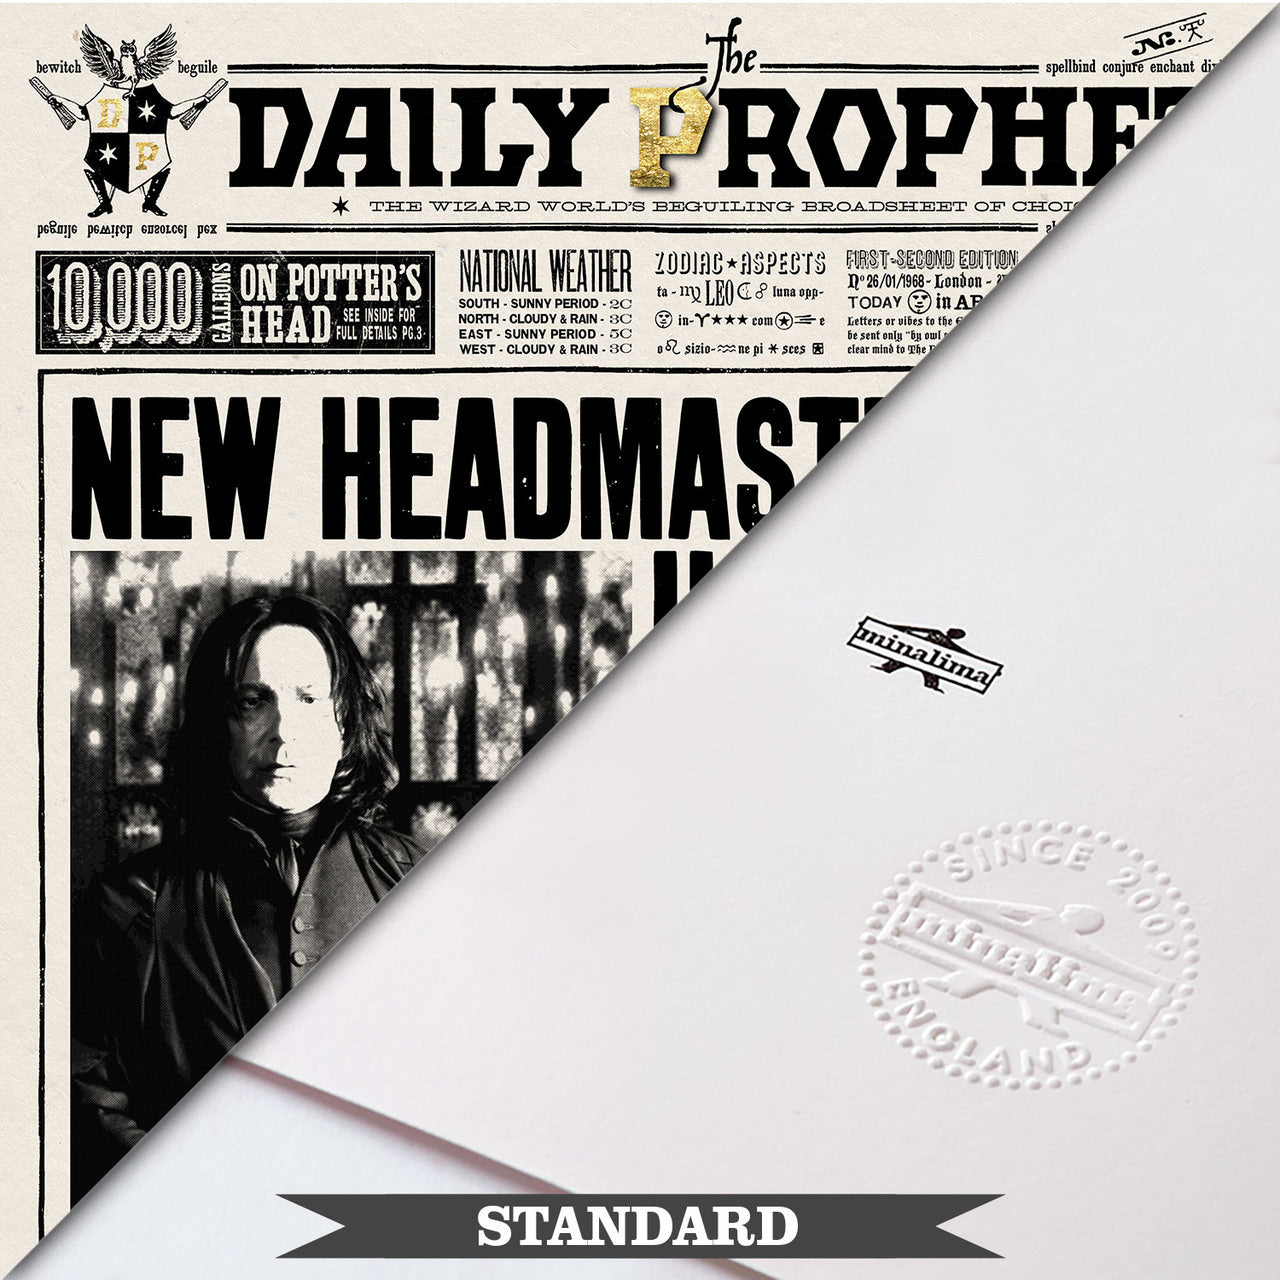 The Daily Prophet - New Headmaster for Hogwarts Limited Edition Art Print